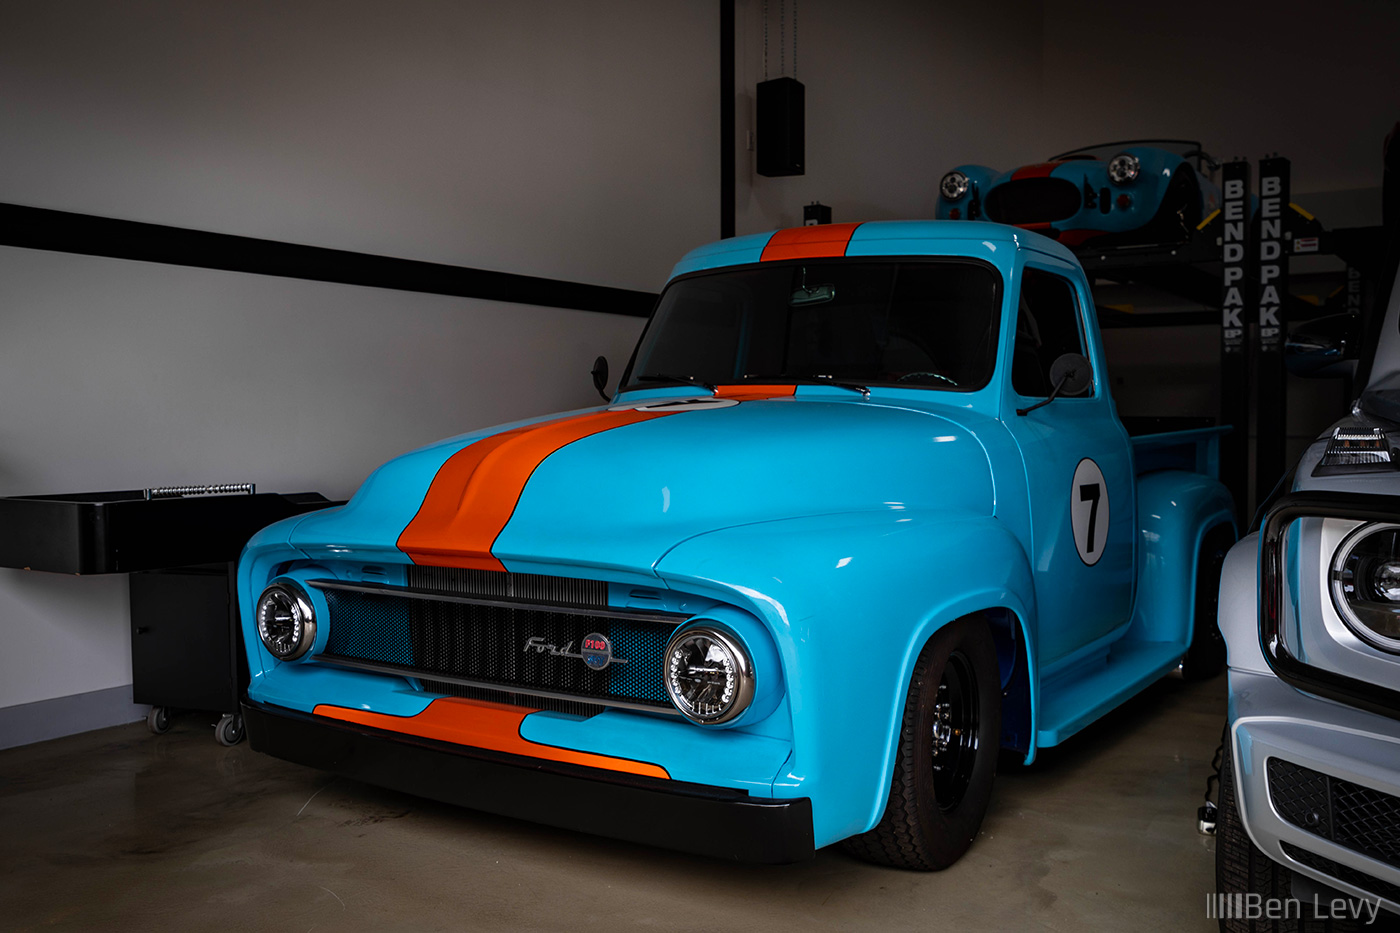 Gulf Colors on Ford F100 Pickup